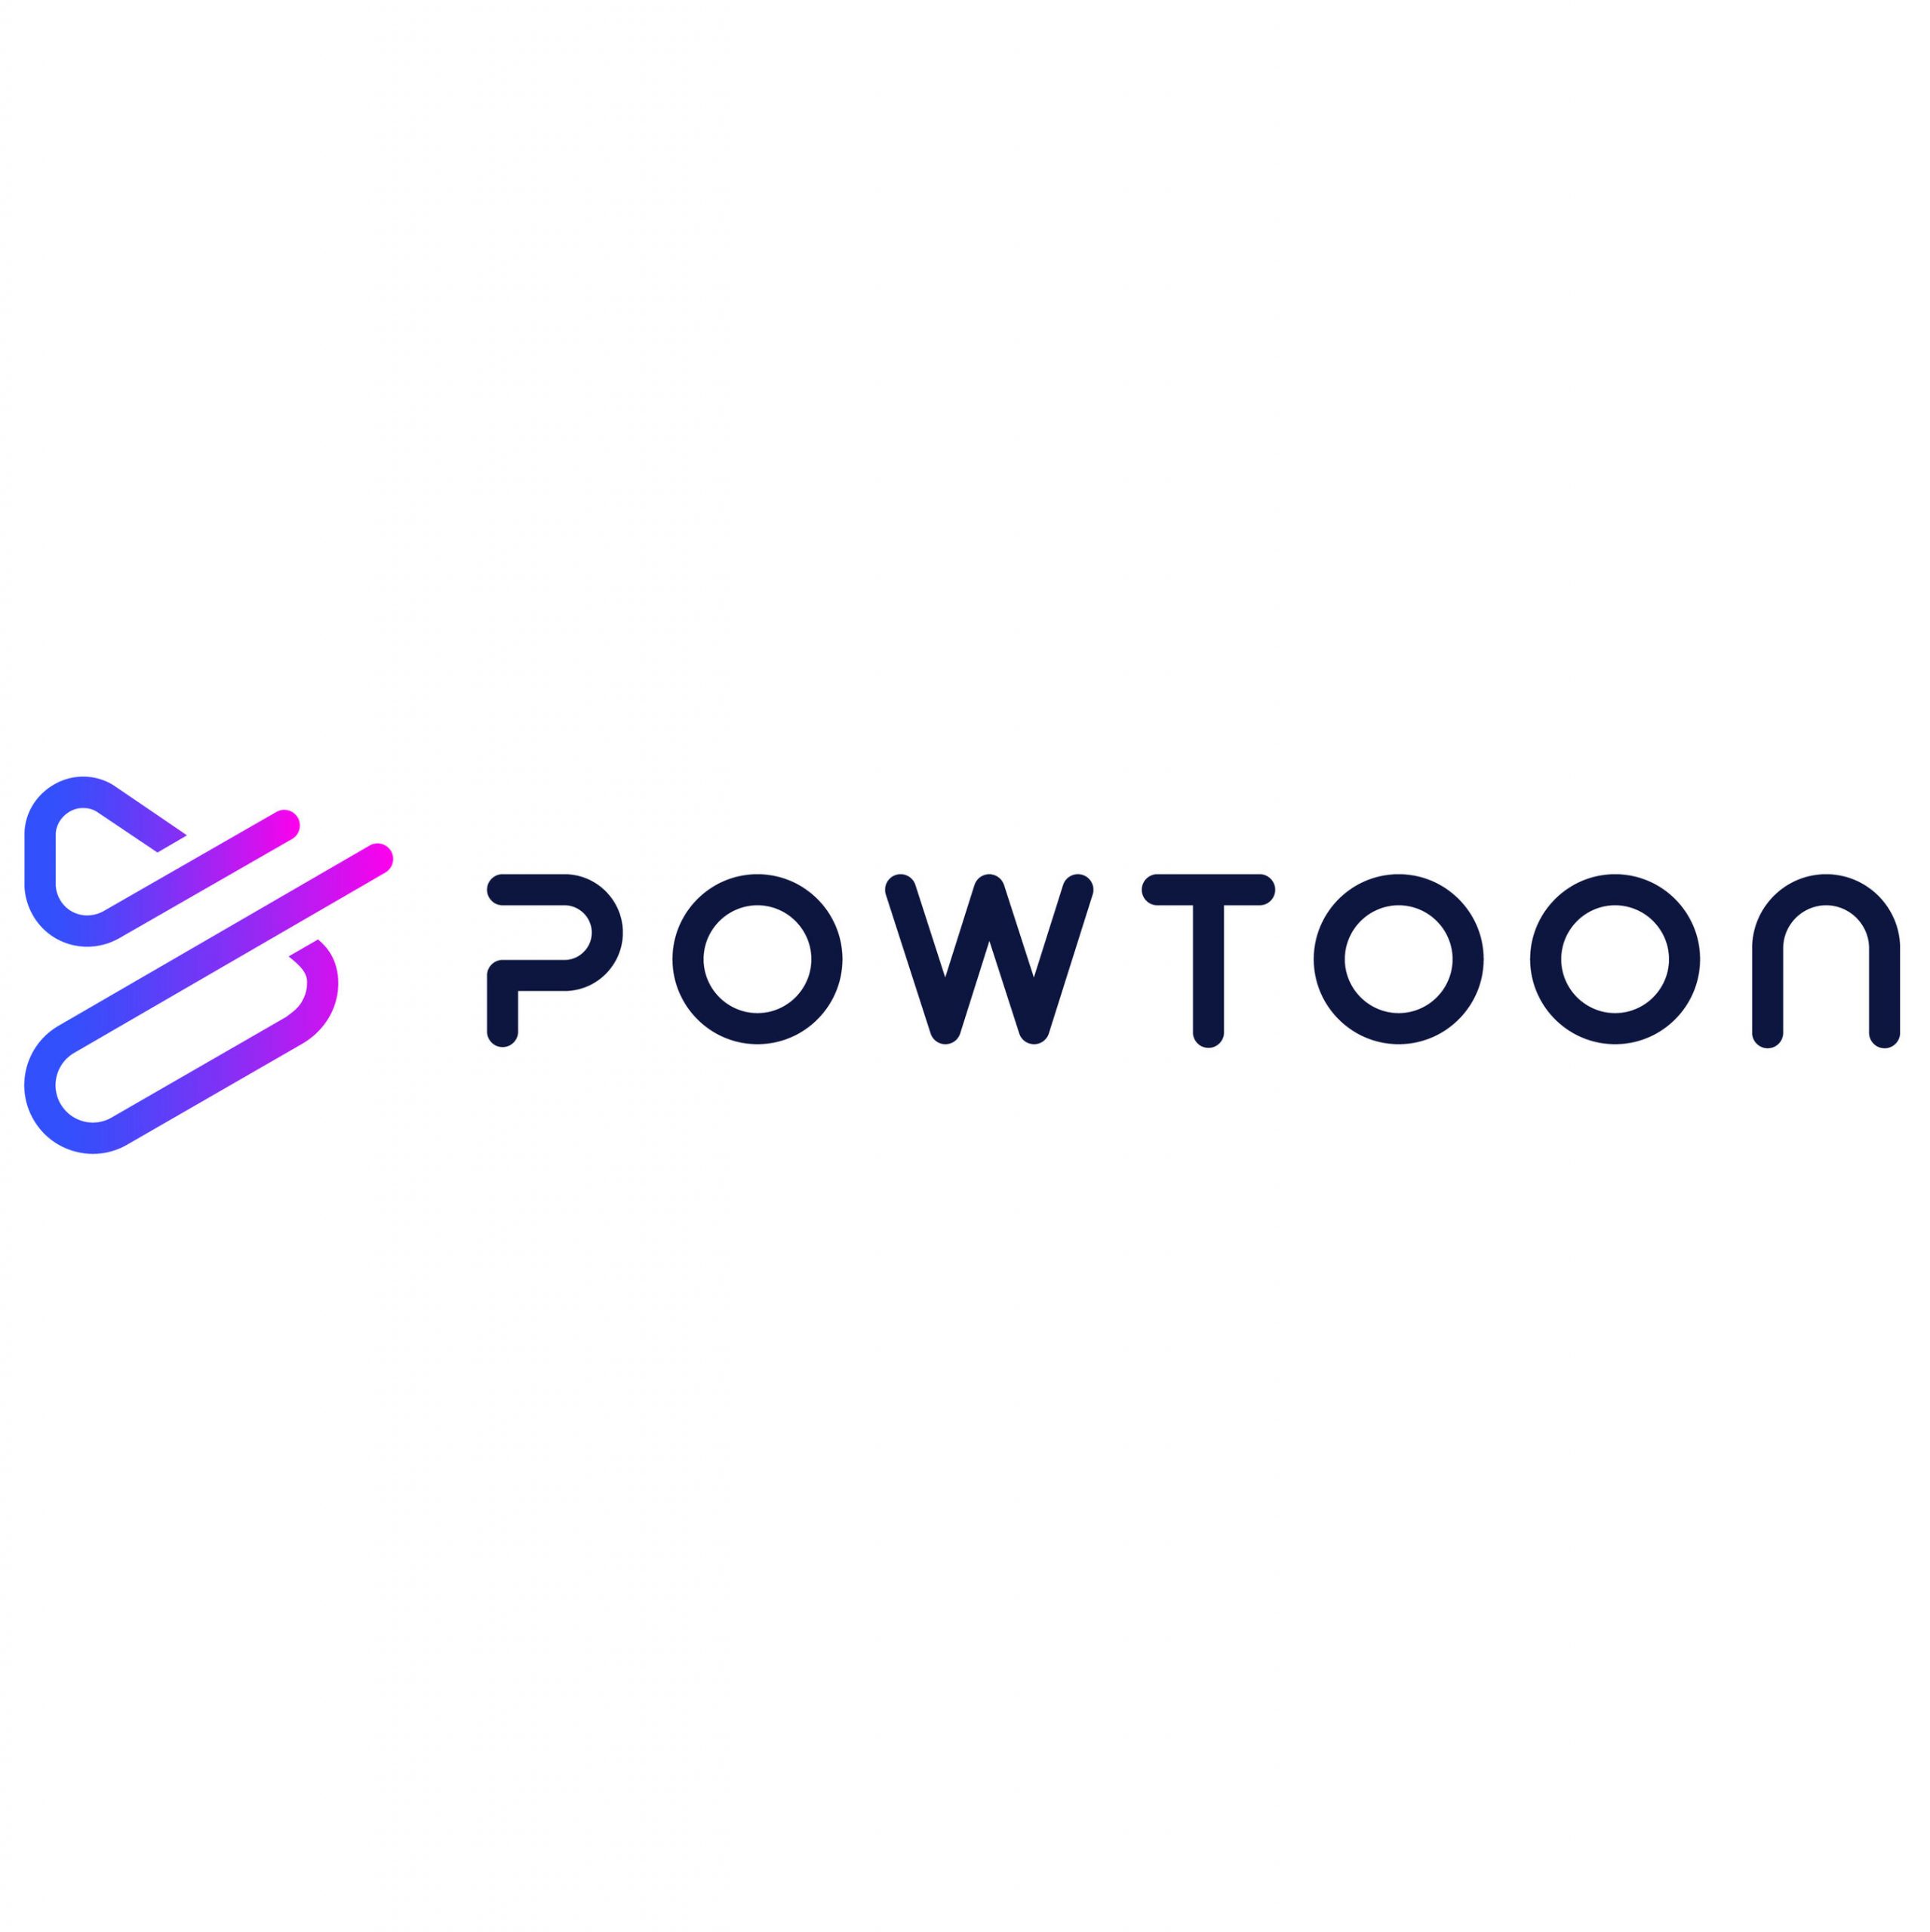 can you share a powtoon to view